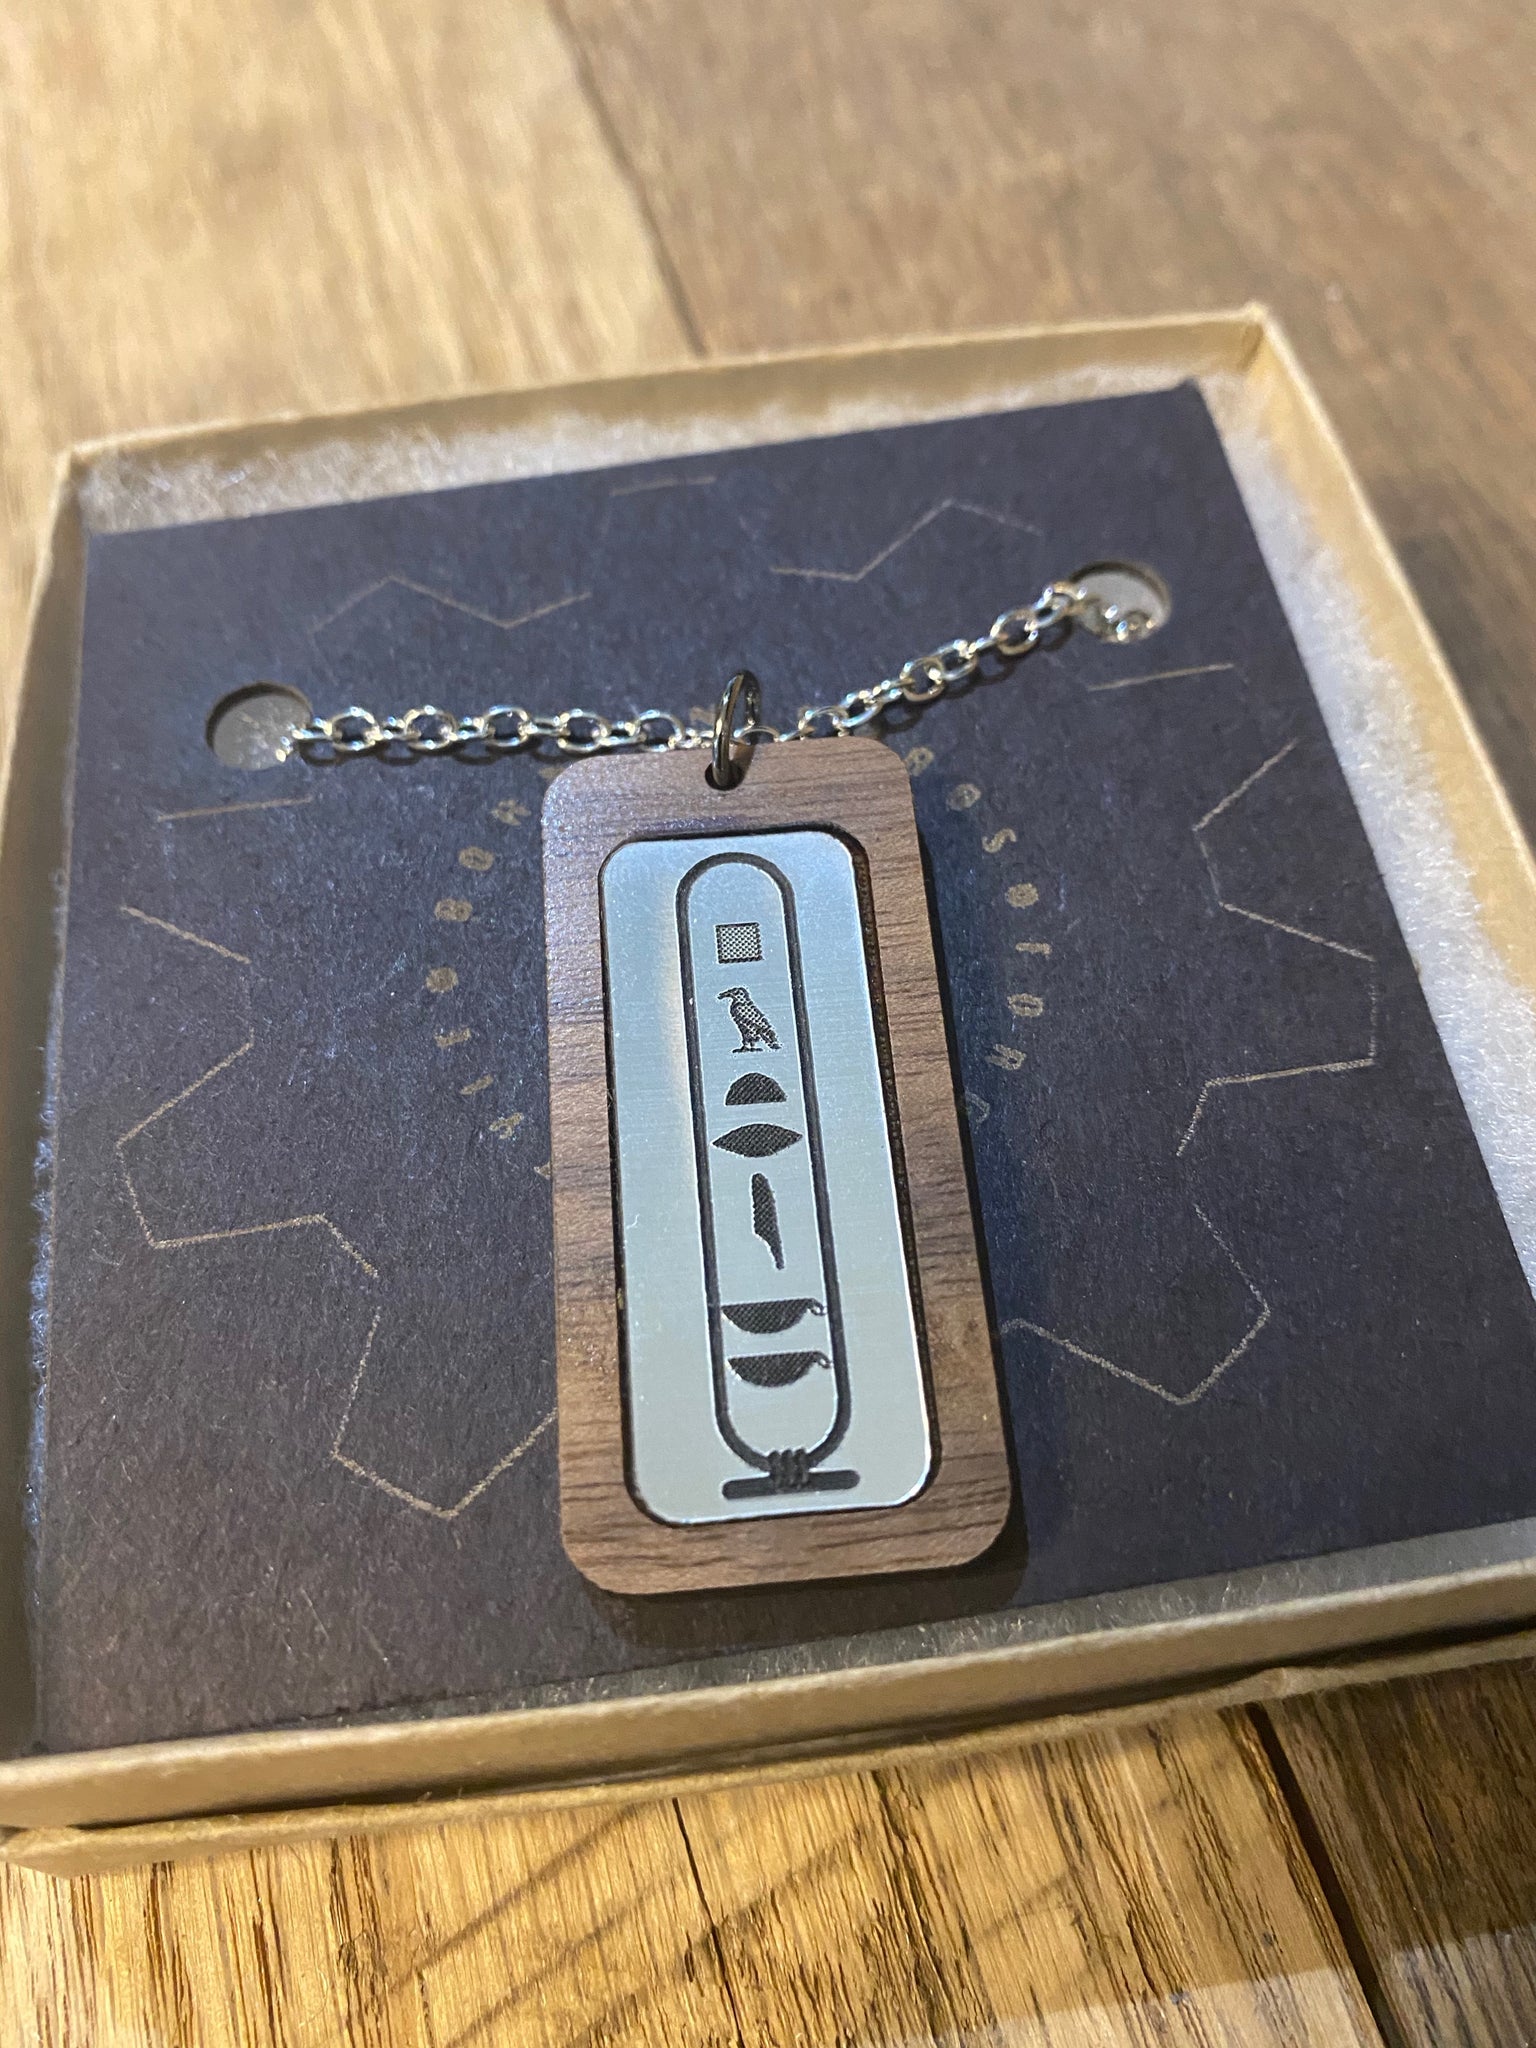 Cartouche and Hieroglyphs Necklace Custom Made with a Name or Phrase